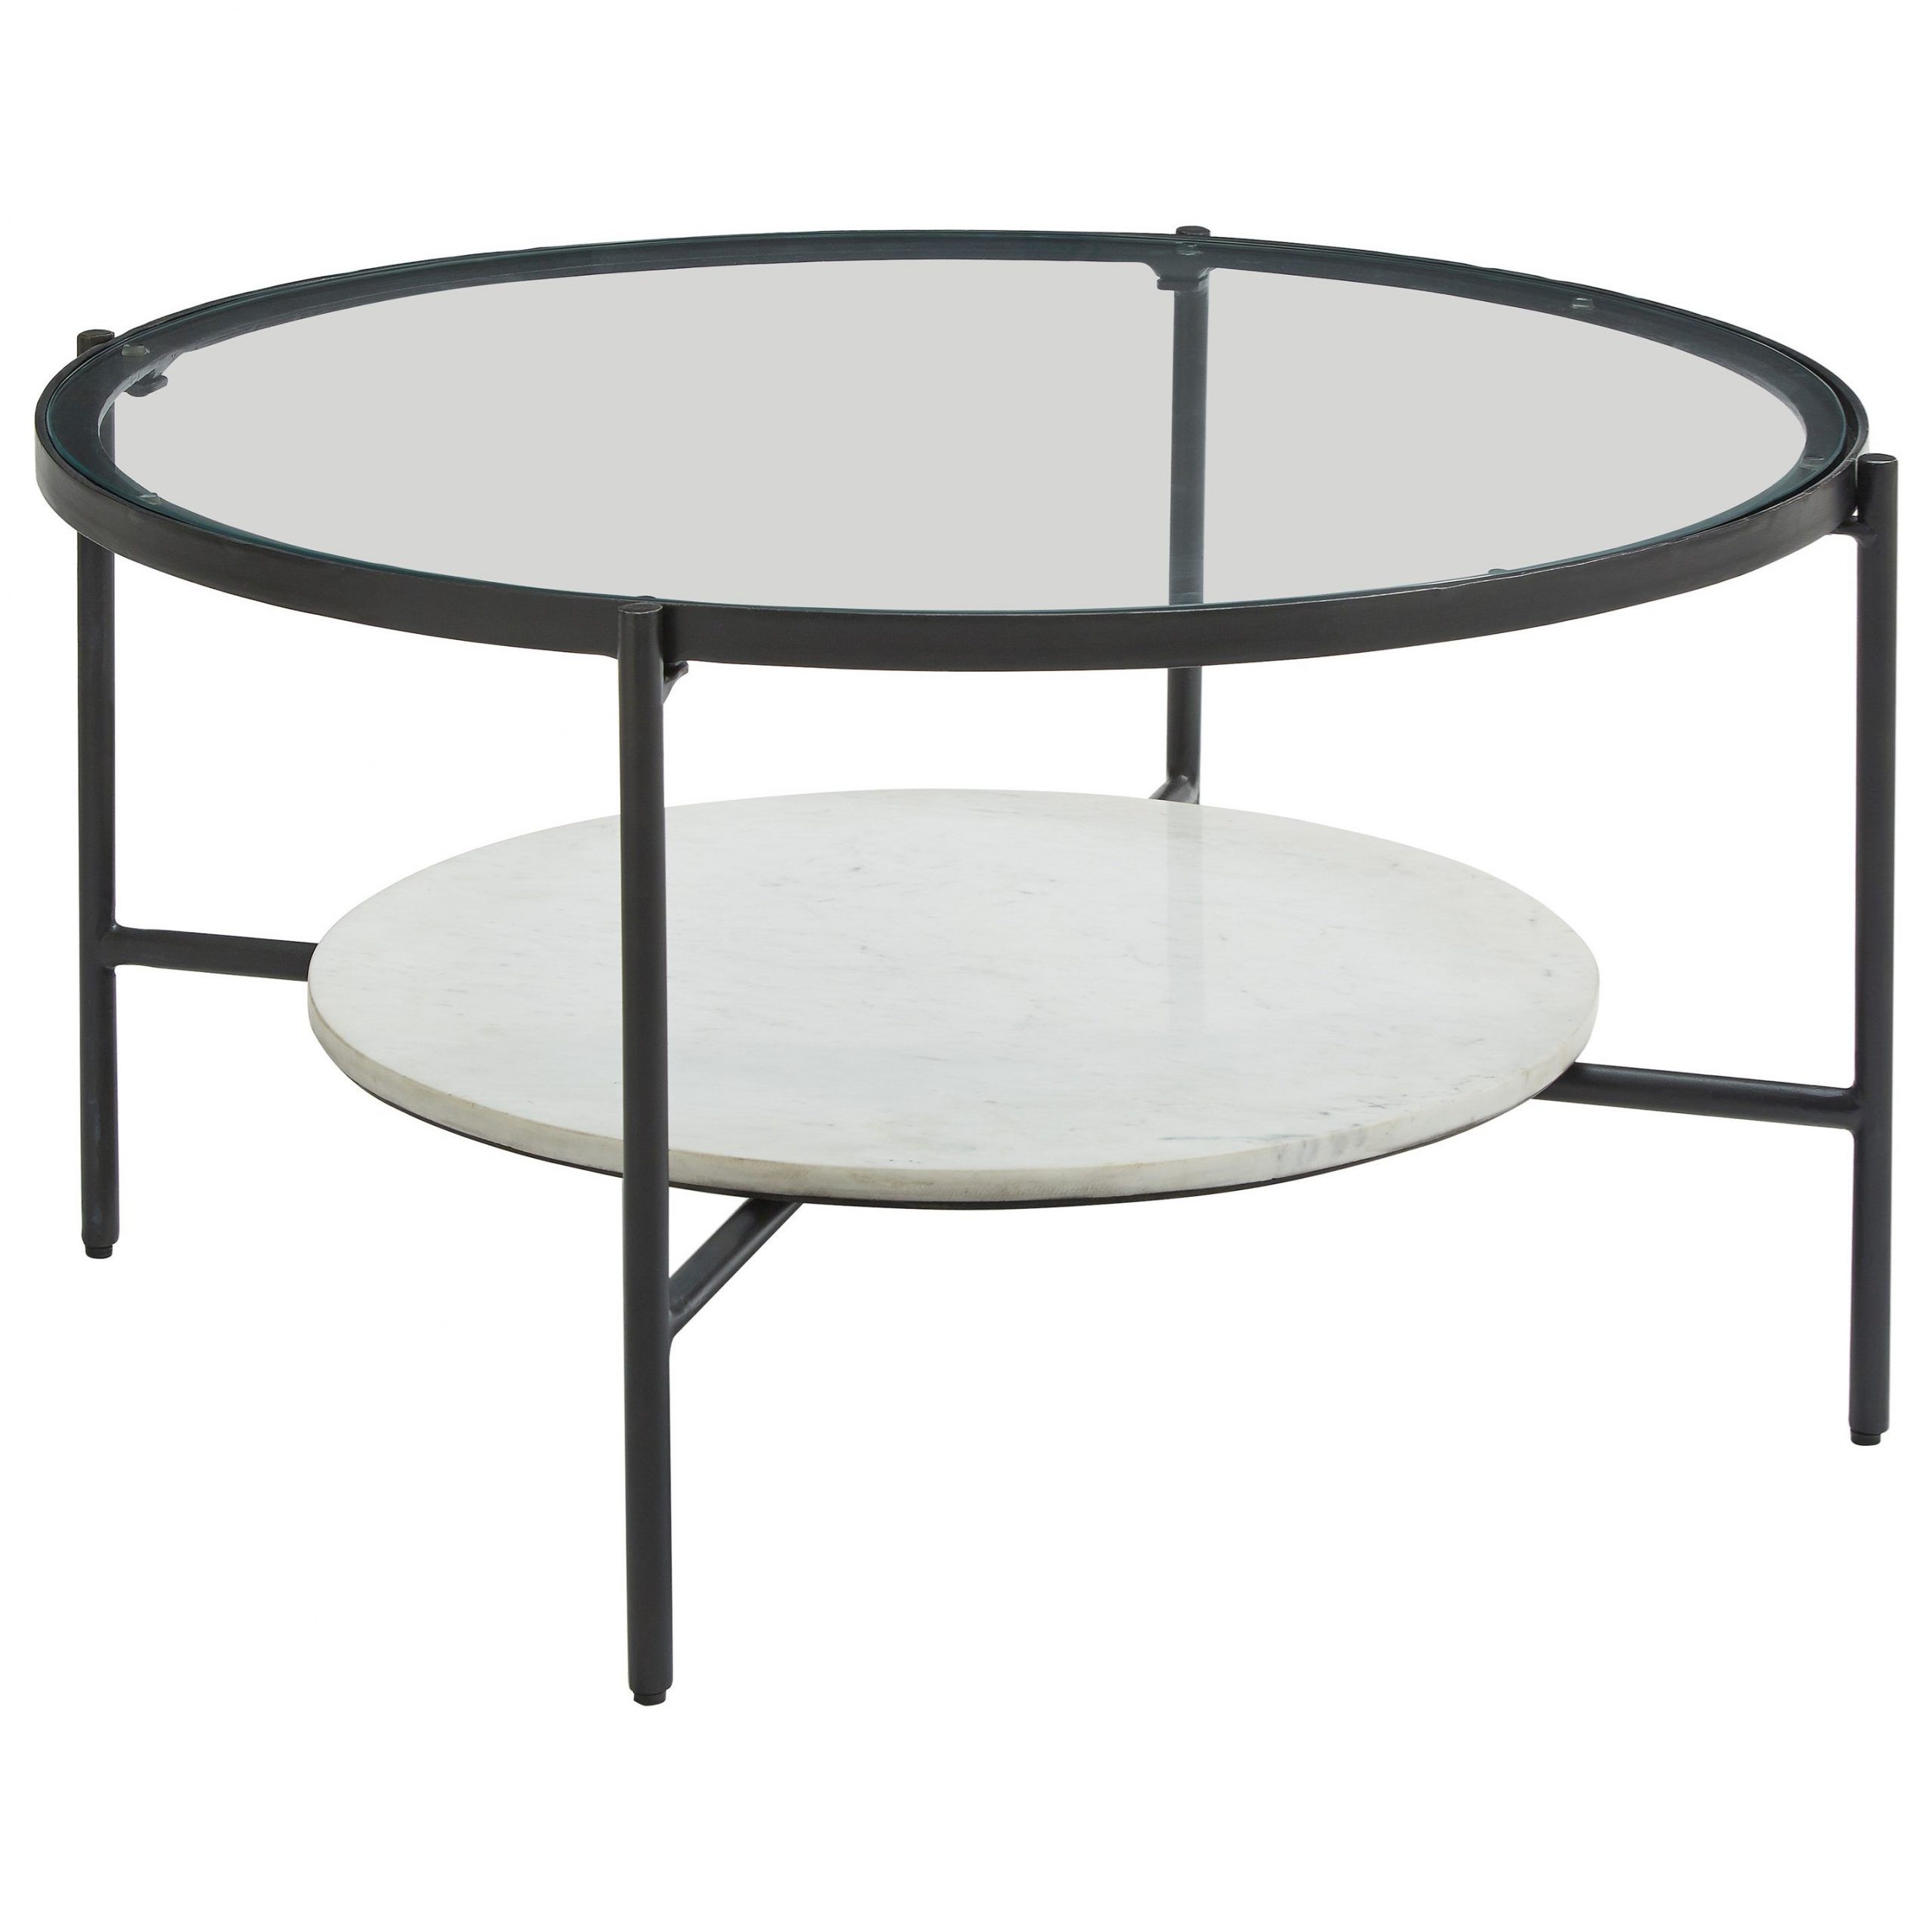 Signature Zia Black Metal Round Cocktail Table With Glass Throughout Black Round Glass Top Cocktail Tables (View 4 of 15)